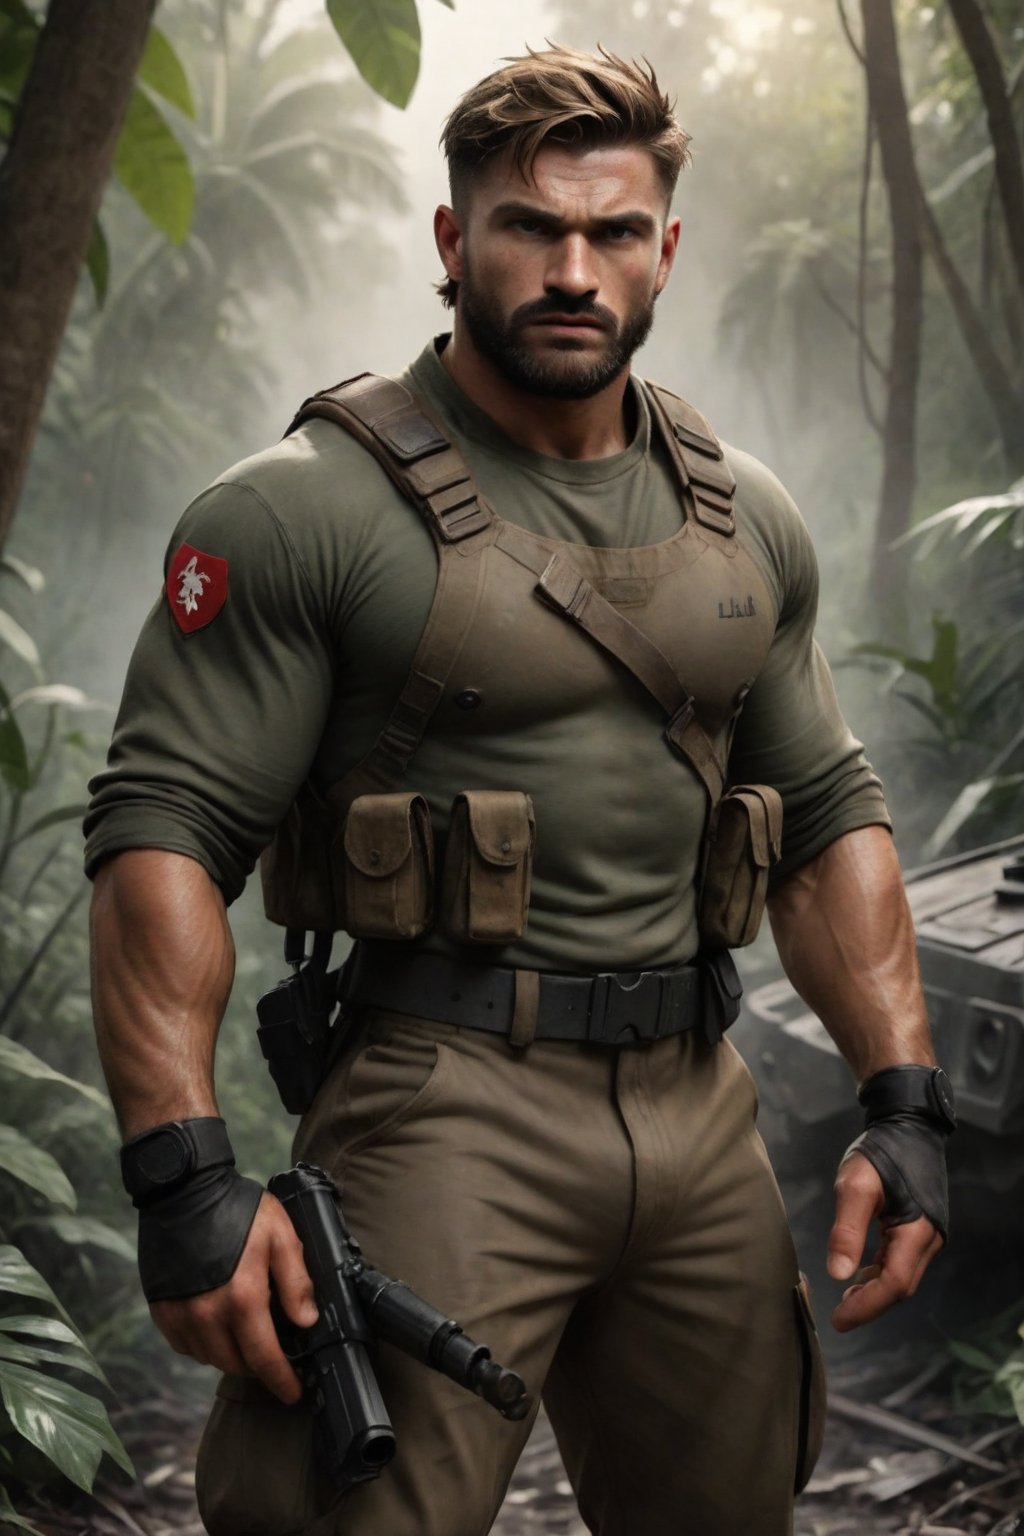 A rugged commando ranger, Jaeggernawt, stands poised in the midst of chaos, his gaze fixed intently on some unseen threat to the side. His short, messy hair is framed by the camouflage beret, while his brown facial hair adds a touch of ruggedness. Muscular and imposing, he wears well-crafted fingerless gloves and a commando uniform that blends seamlessly into the lush jungle surroundings. The camera captures him from a dynamic side angle, with the Leica 85mm lens rendering every detail in stunning clarity. Explosions erupt in the distance, their fiery aftermath illuminated by cinematic bokeh lighting effects in dramatic backlighting. Turbulent daylighting casts a sense of urgency over the scene, as Jaeggernawt readies himself for action in this epic and entertaining guerrilla commando movie-inspired masterpiece.